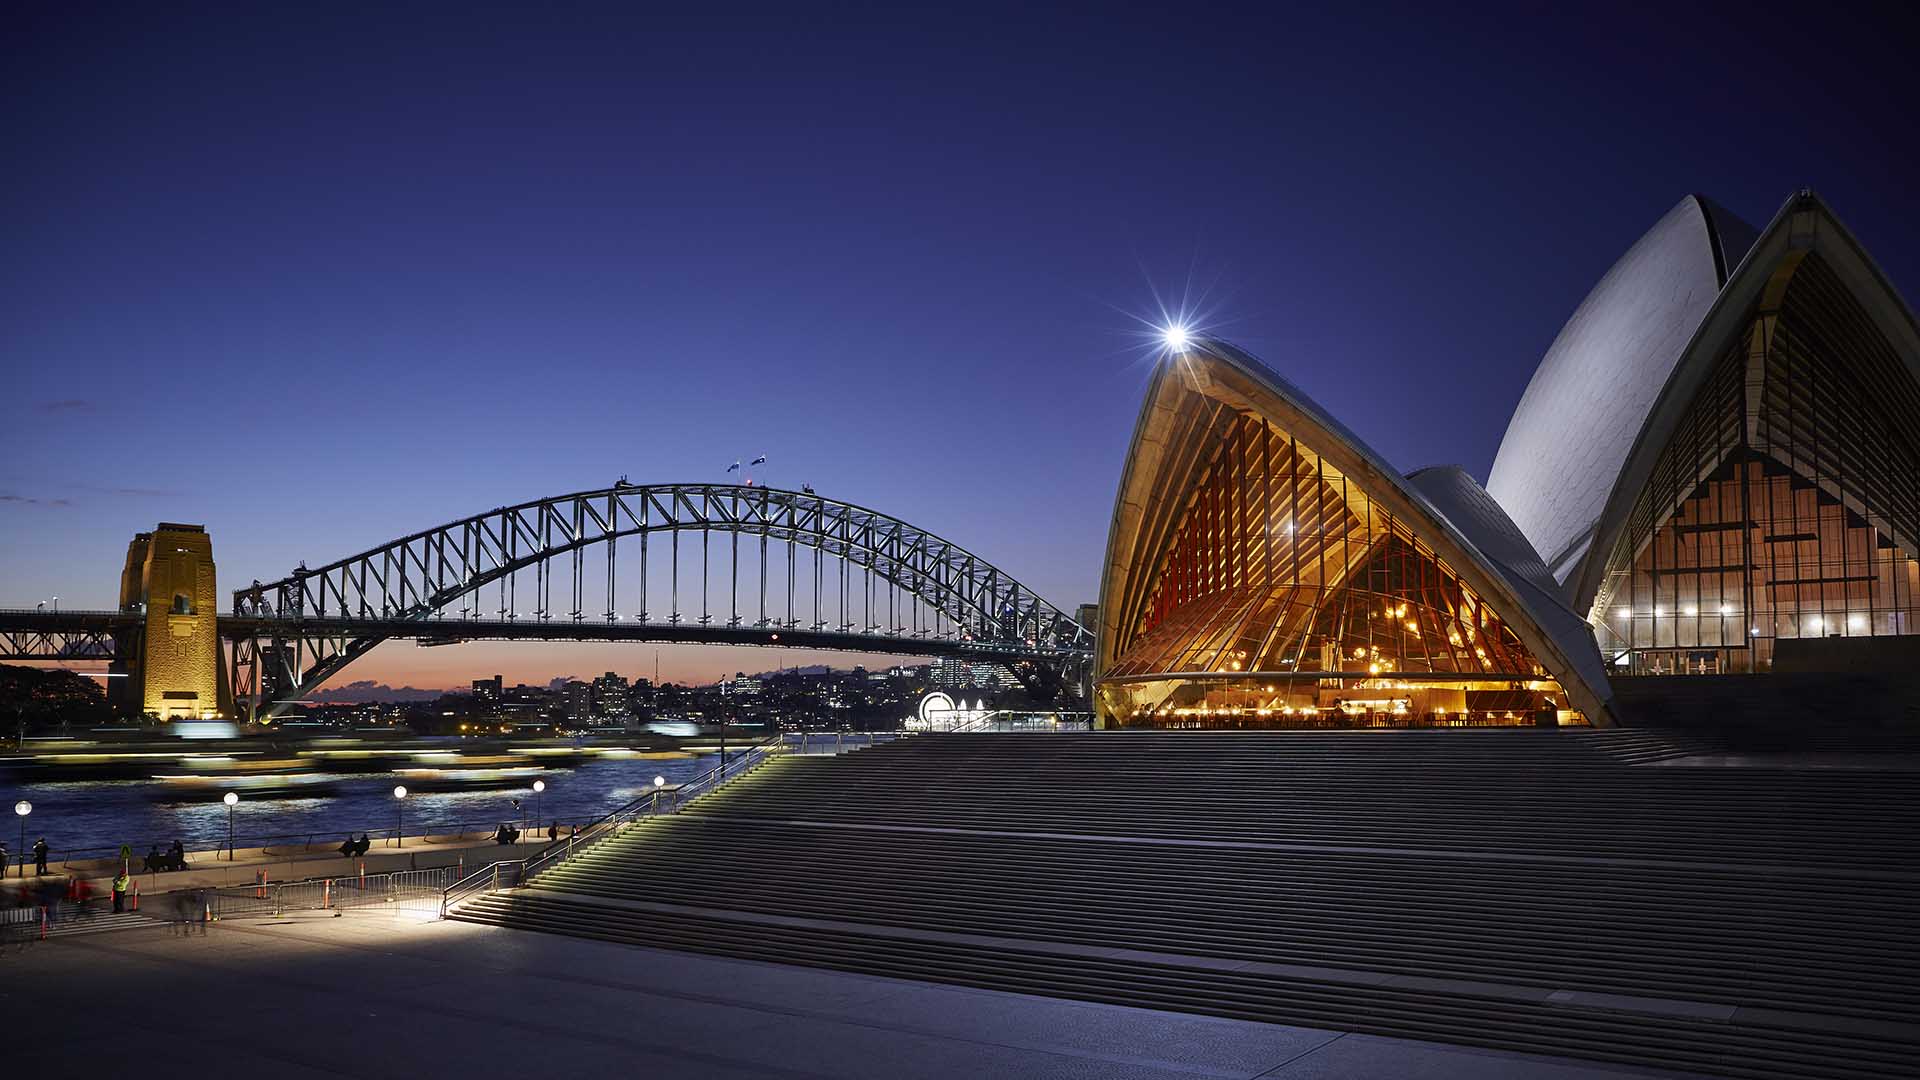 The Sydney Opera House Has Announced a Big Reopening Lineup Filled with Live Gigs and Festivals